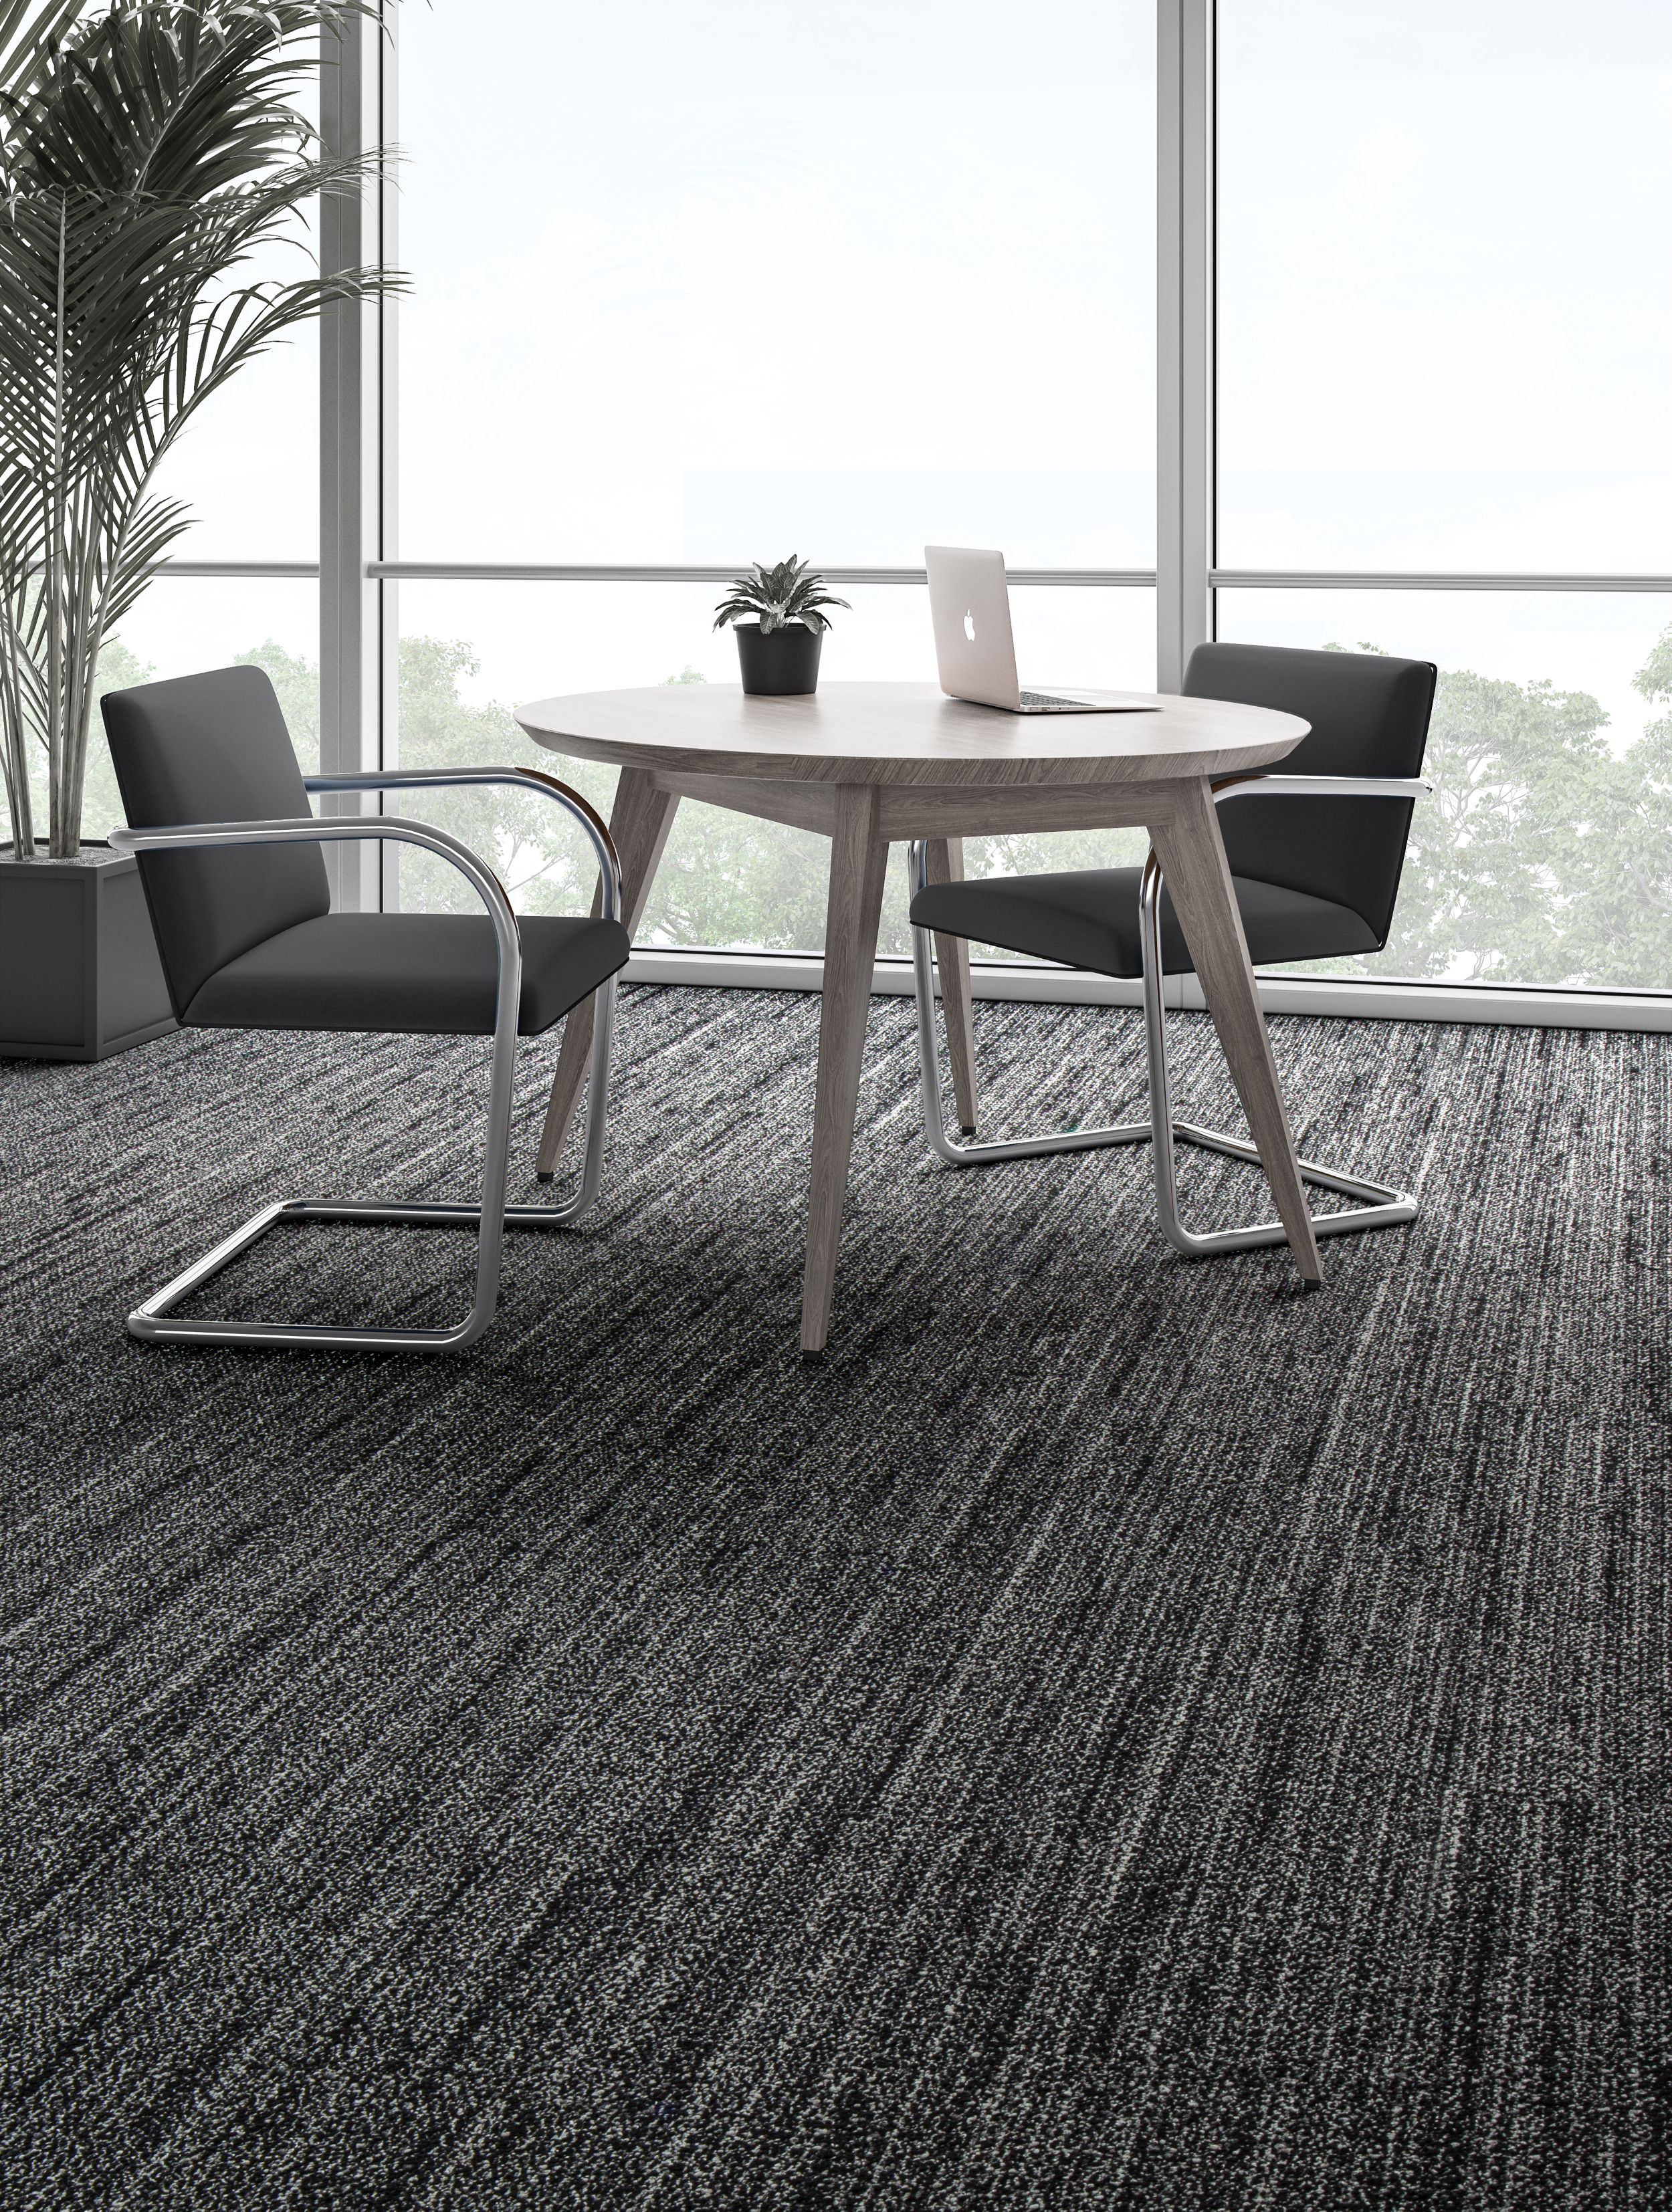 Interface WW870 plank carpet tile shown with small table and chairs numéro d’image 8